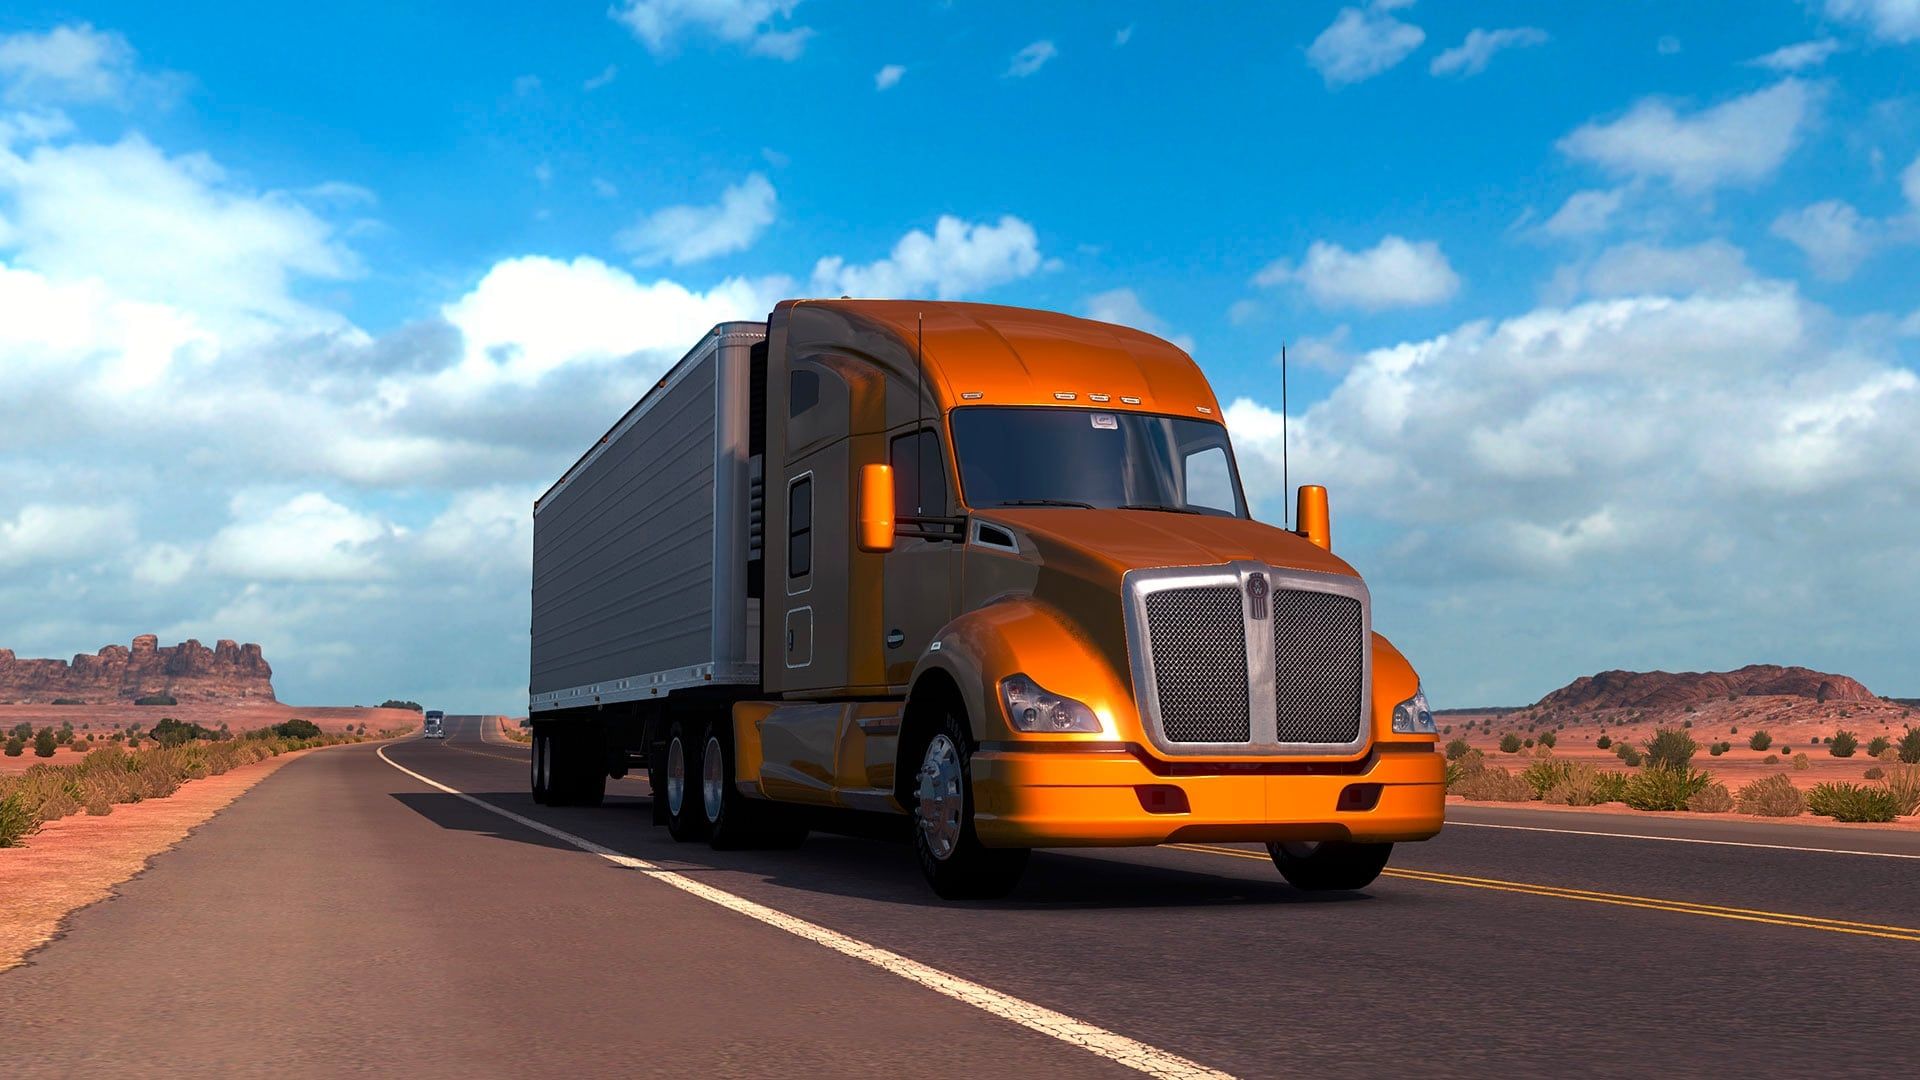 Patch notes for ETS2 and ATS